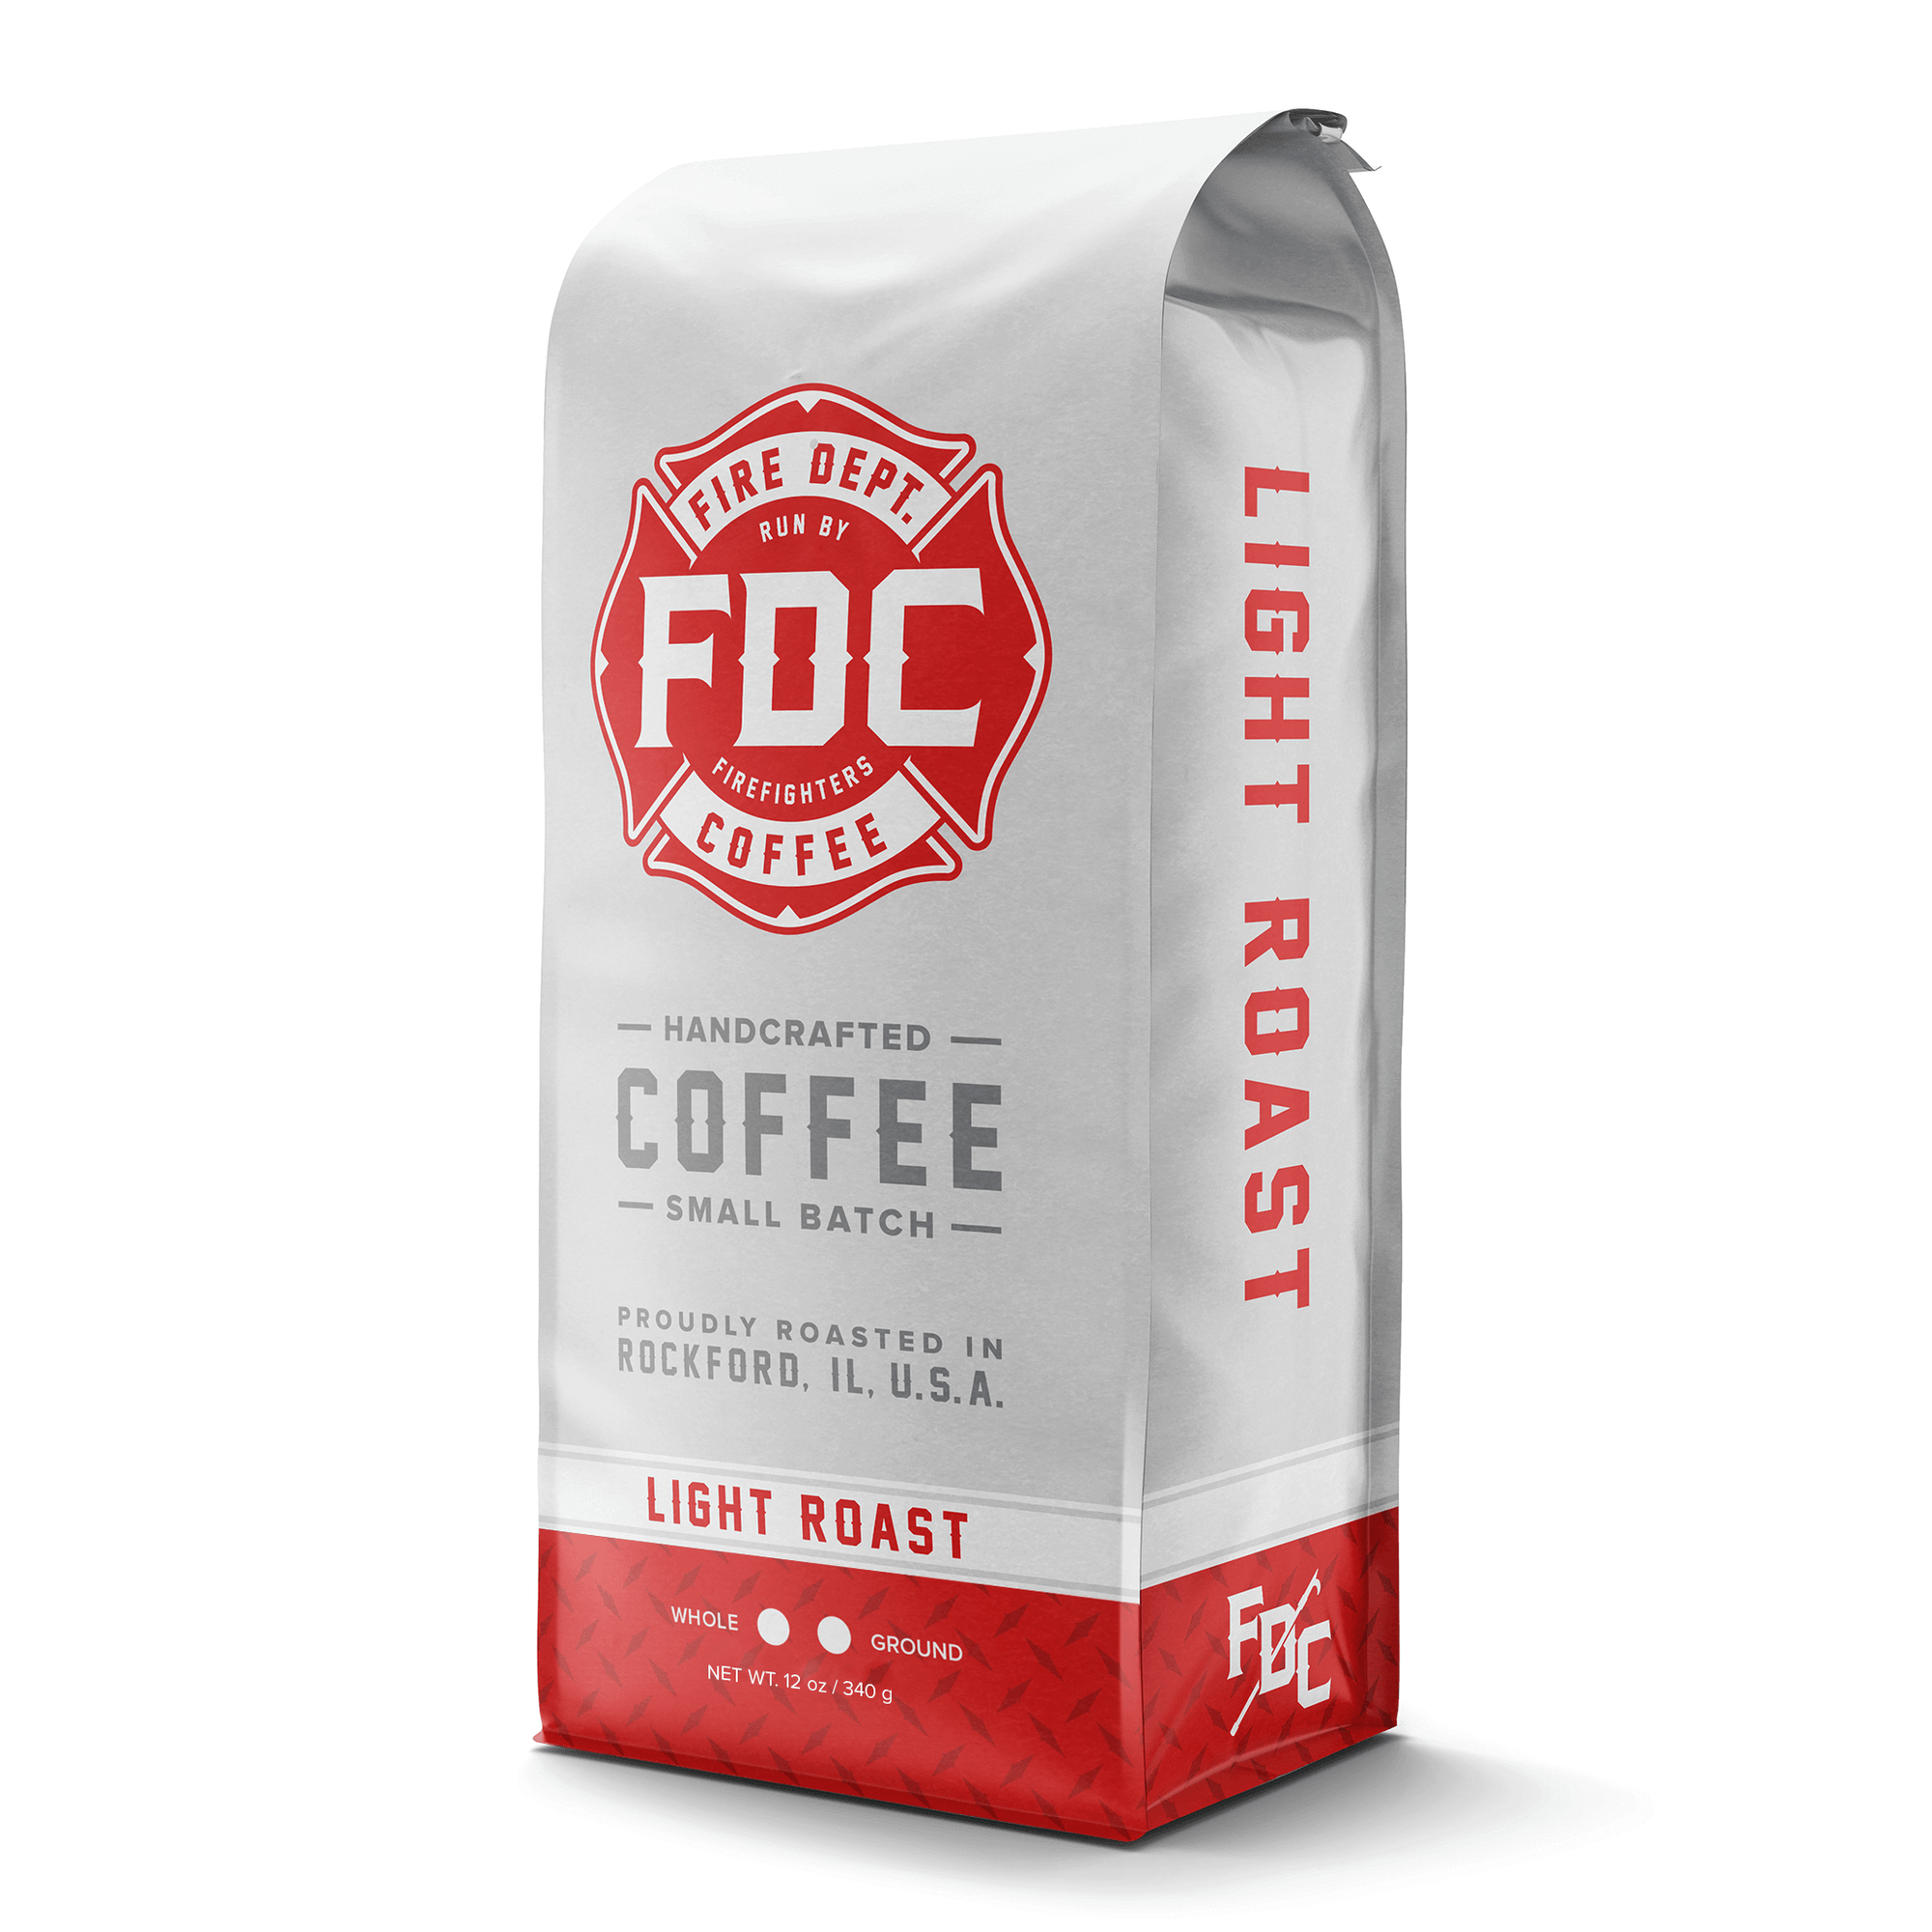 A 12-ounce package of Fire Department Coffee's Light Roast.